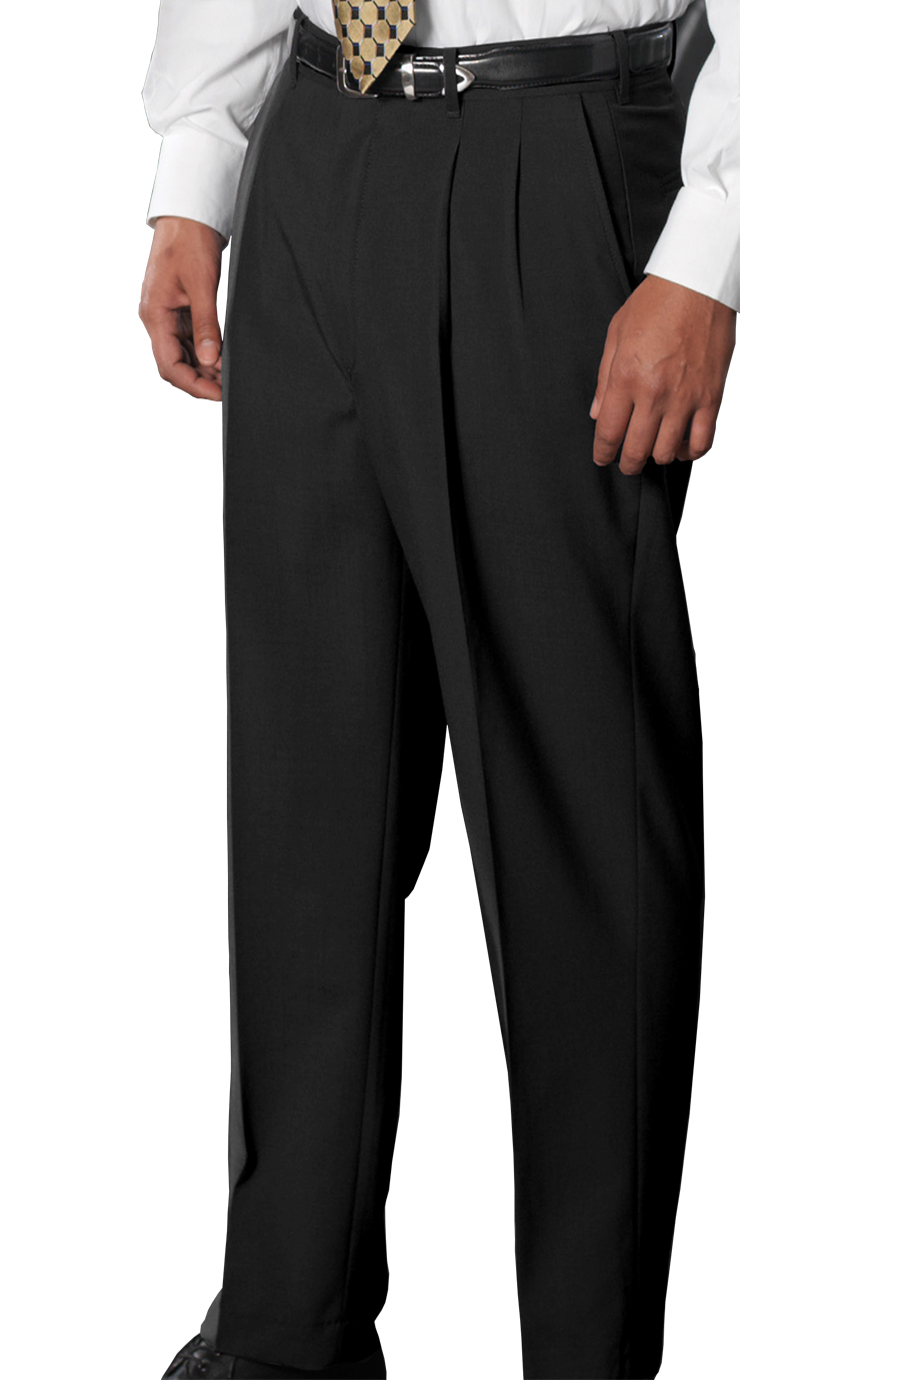 Edwards Big & Tall  Wool Blend Pleated Dress Pant - Online Exclusive